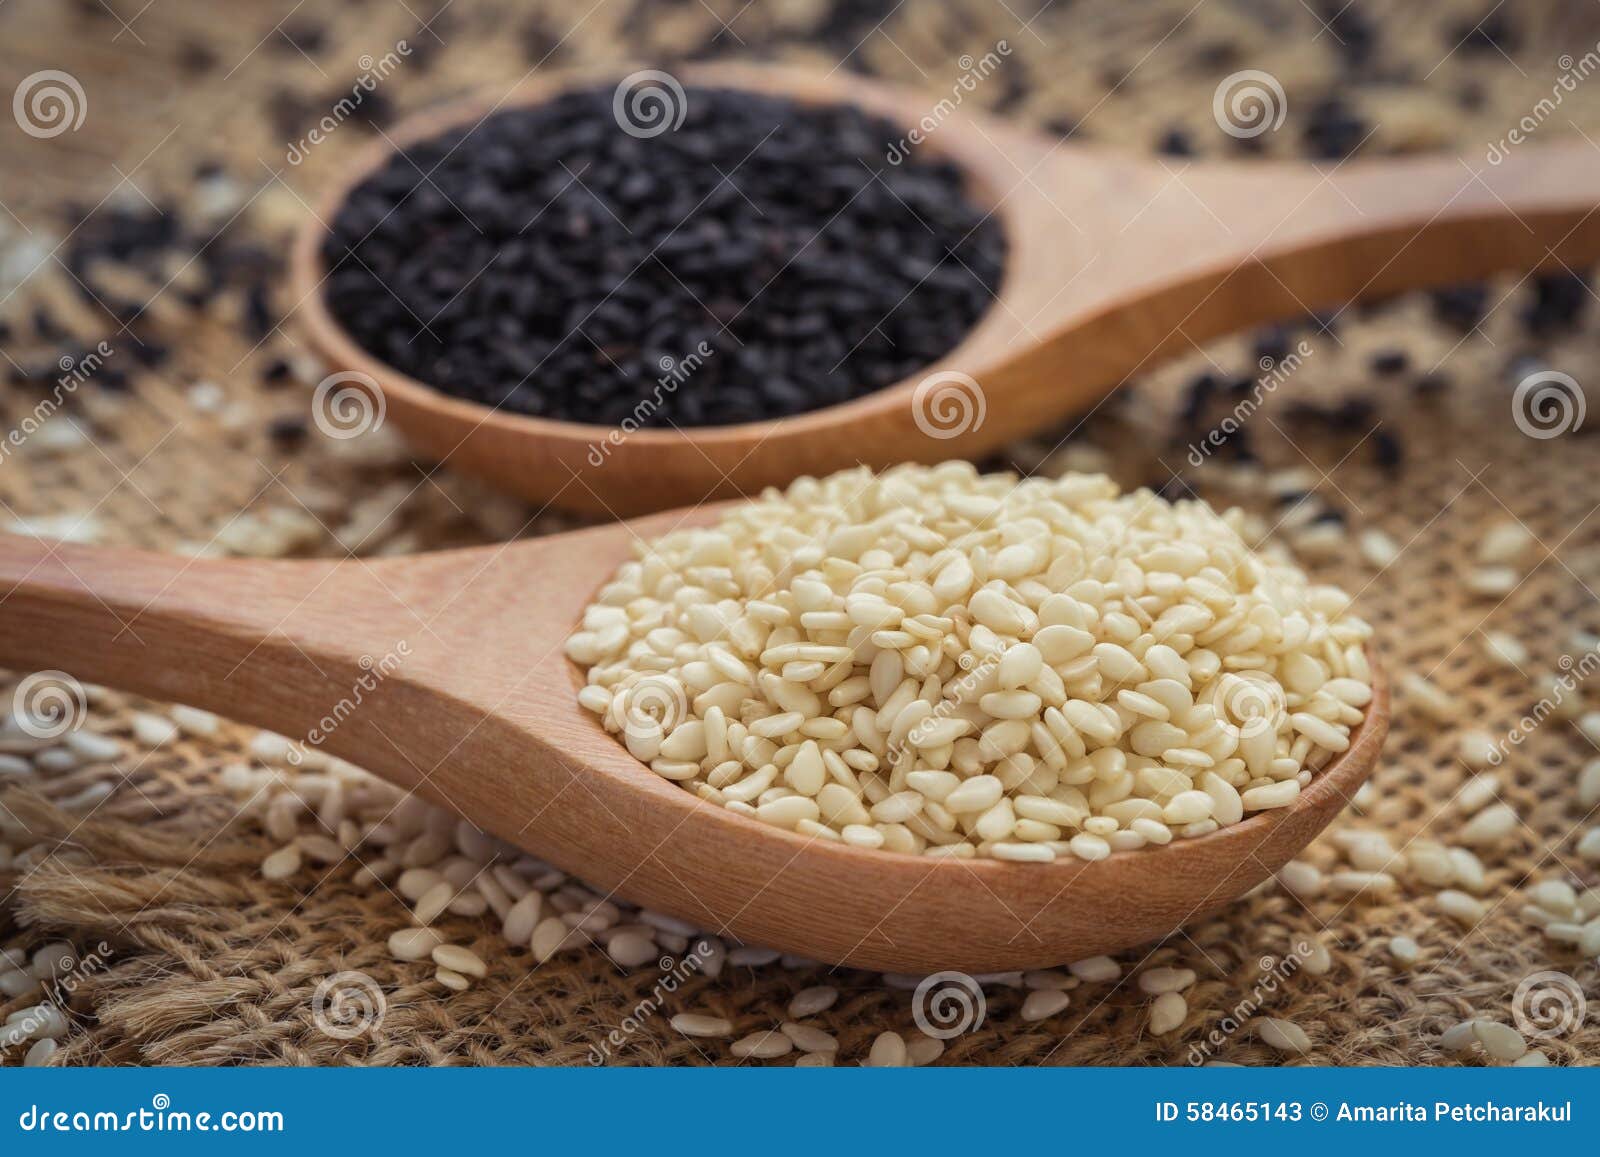 white sesame and black sesame seed on wooden spoon